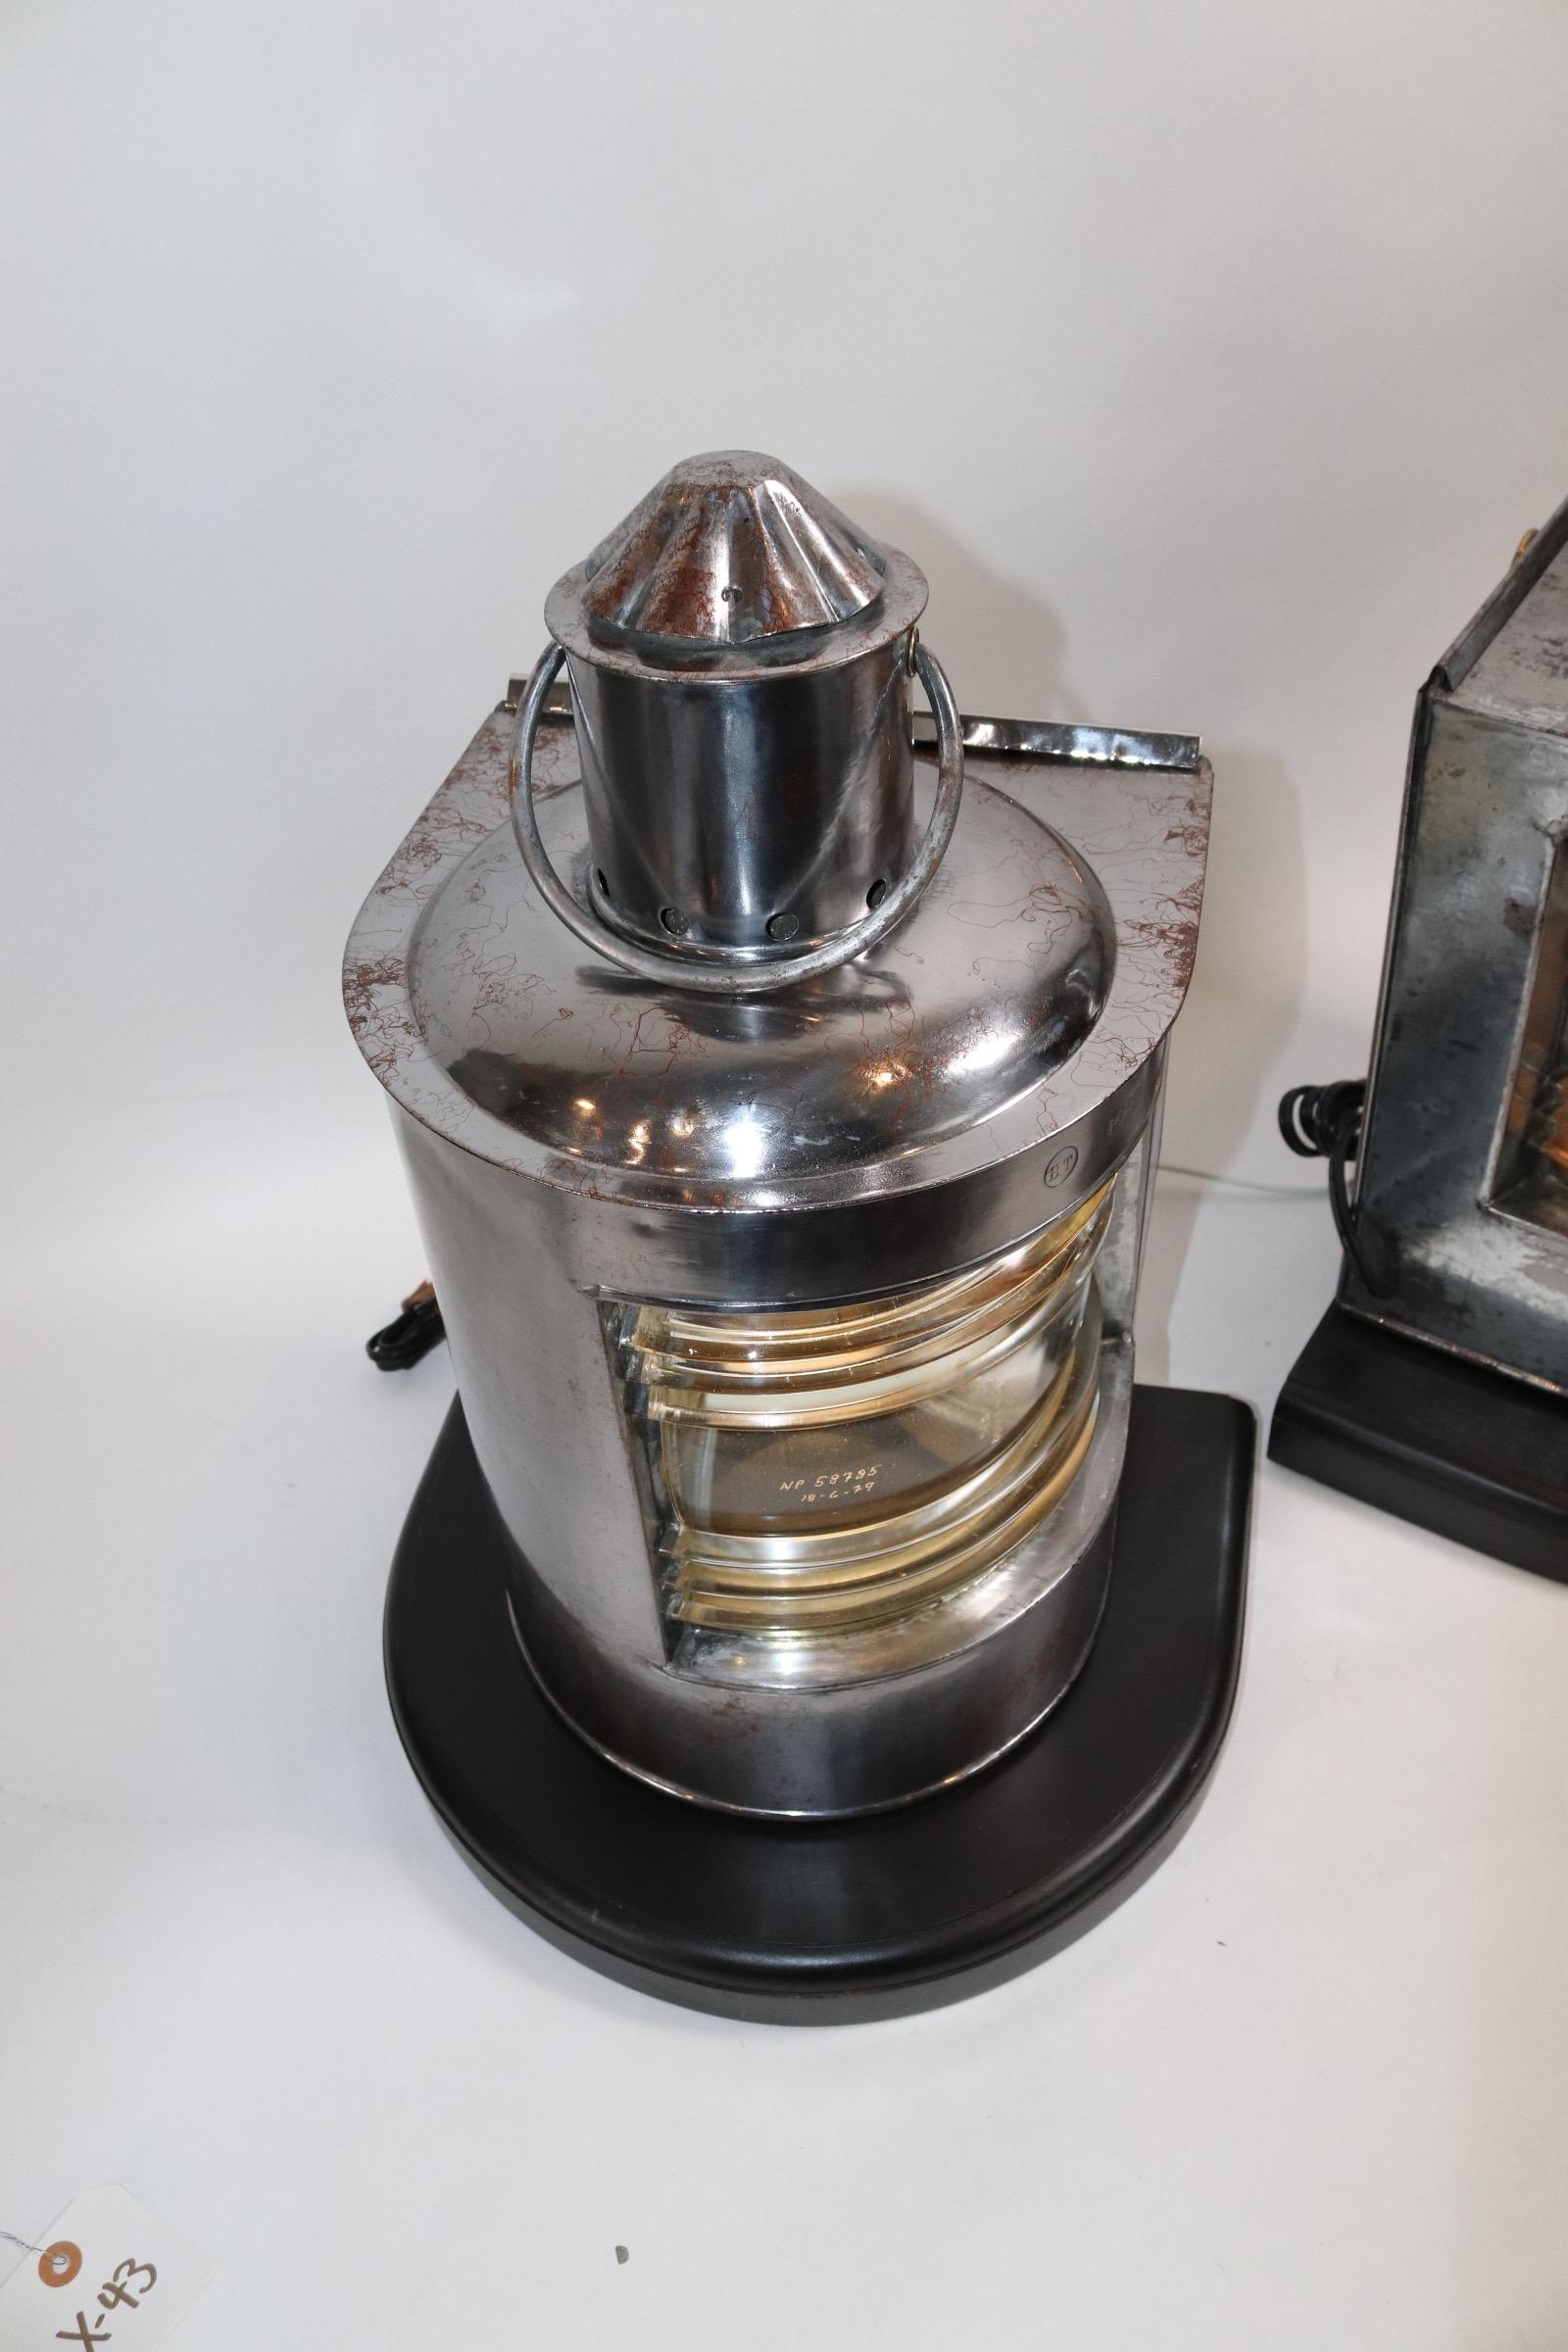 Pair of polished and lacquered ships port and starboard lanterns with clear glass Fresnel lenses, vented chimney tops, carry handles and sliding rear doors. Mounted to mahogany bases with routed edges and electrified for home display. Weight is 24